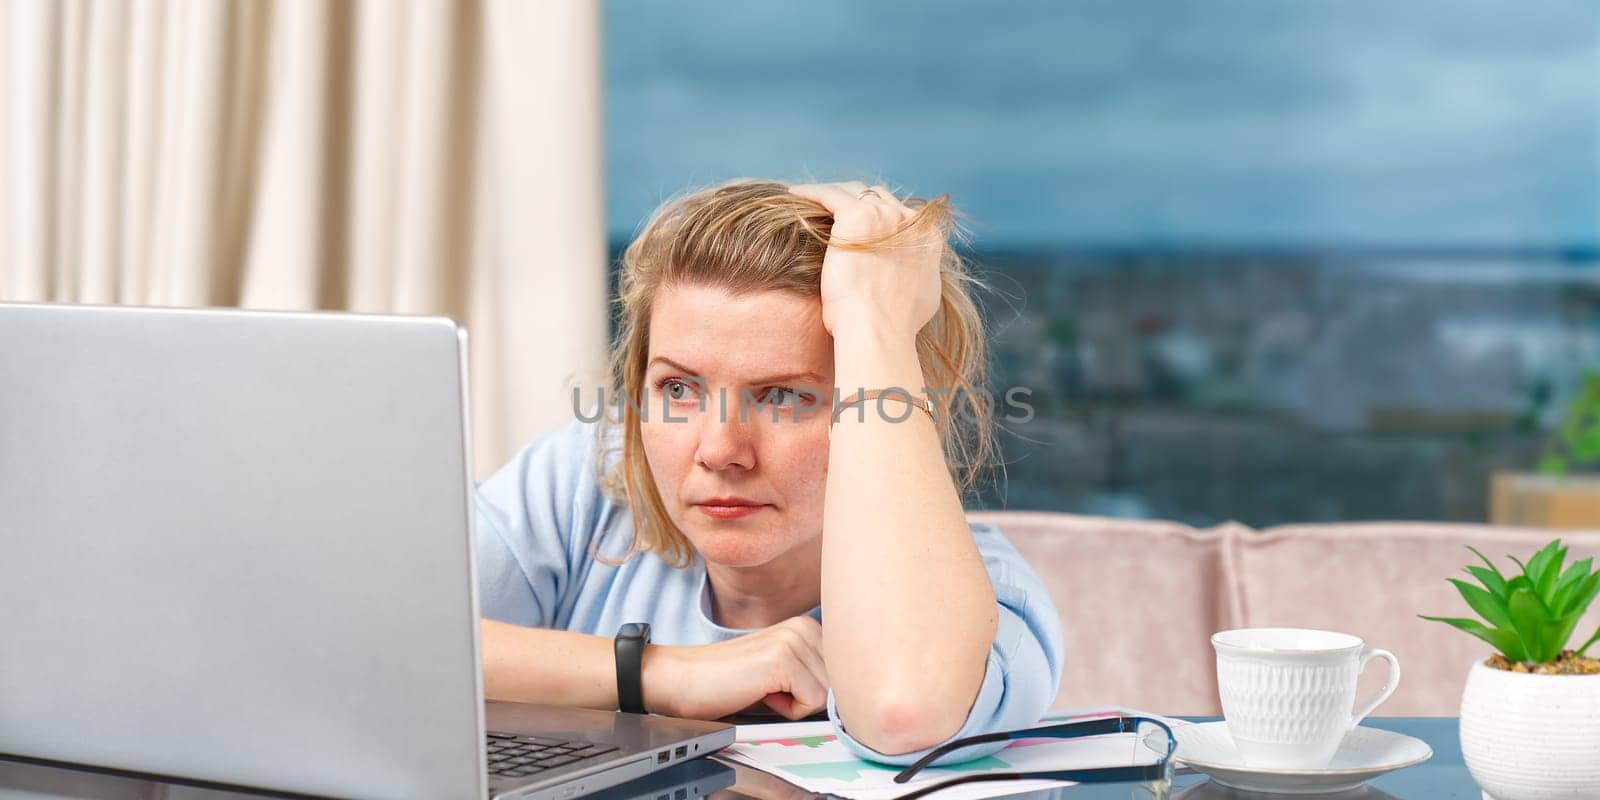 Unhappy tired woman at home office working with laptop. Stress, depression, loneliness, fatigue, burnout concept by PhotoTime